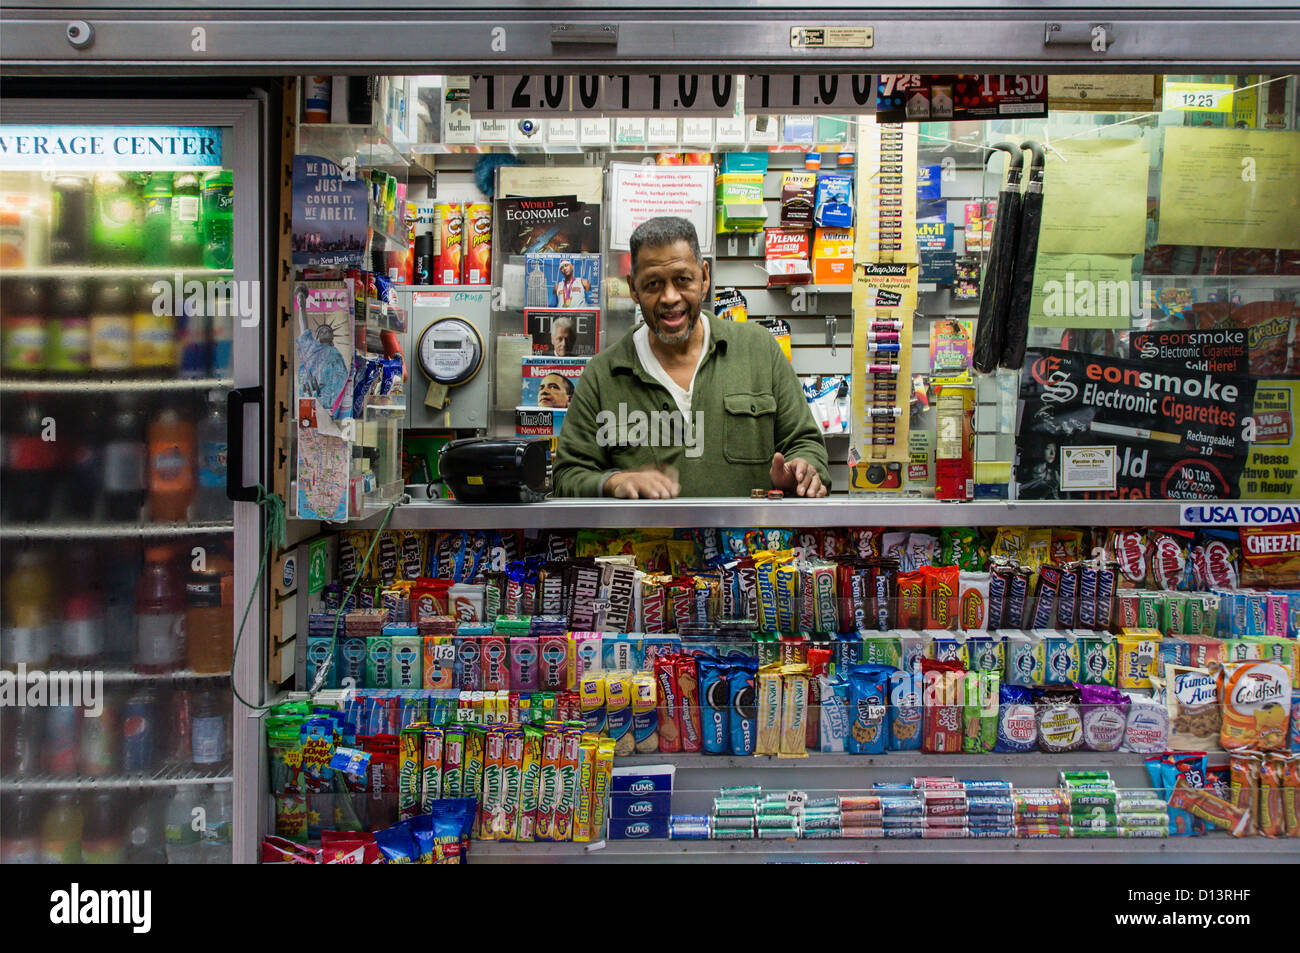 Afro American Man in Kiosk , Wall Street, Financial District, New York City Stock Photo